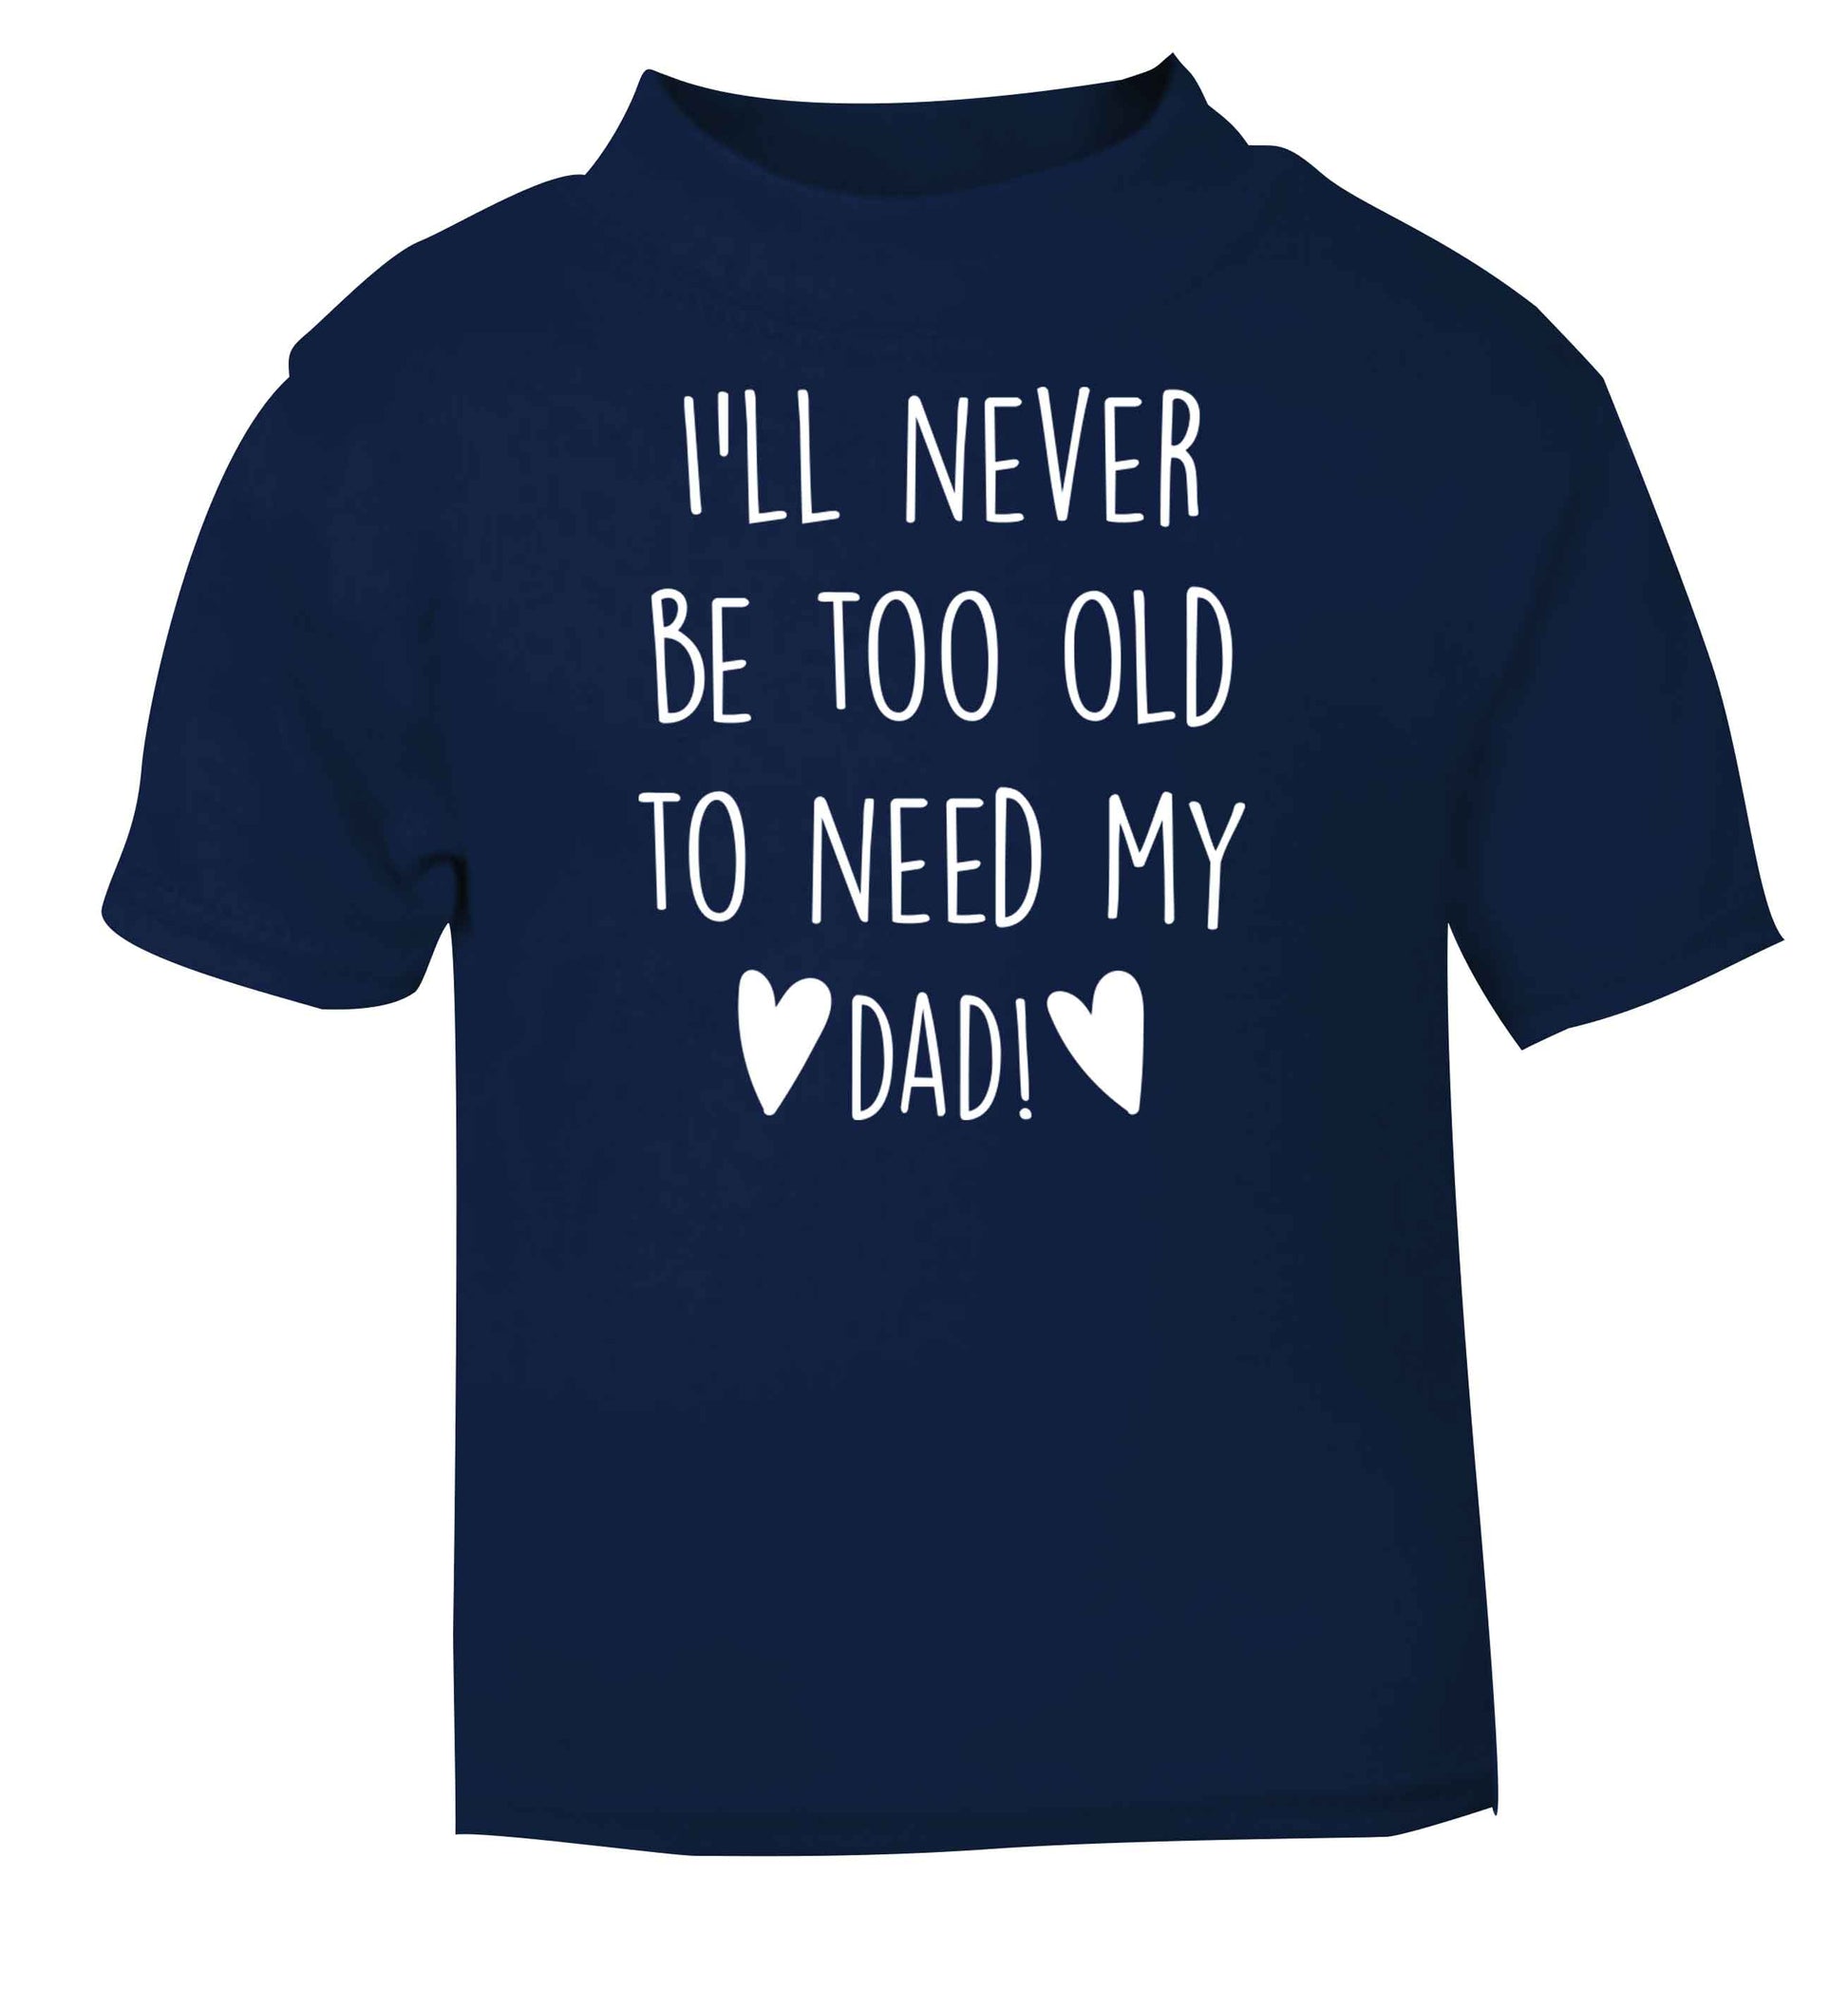 I'll never be too old to need my dad navy baby toddler Tshirt 2 Years